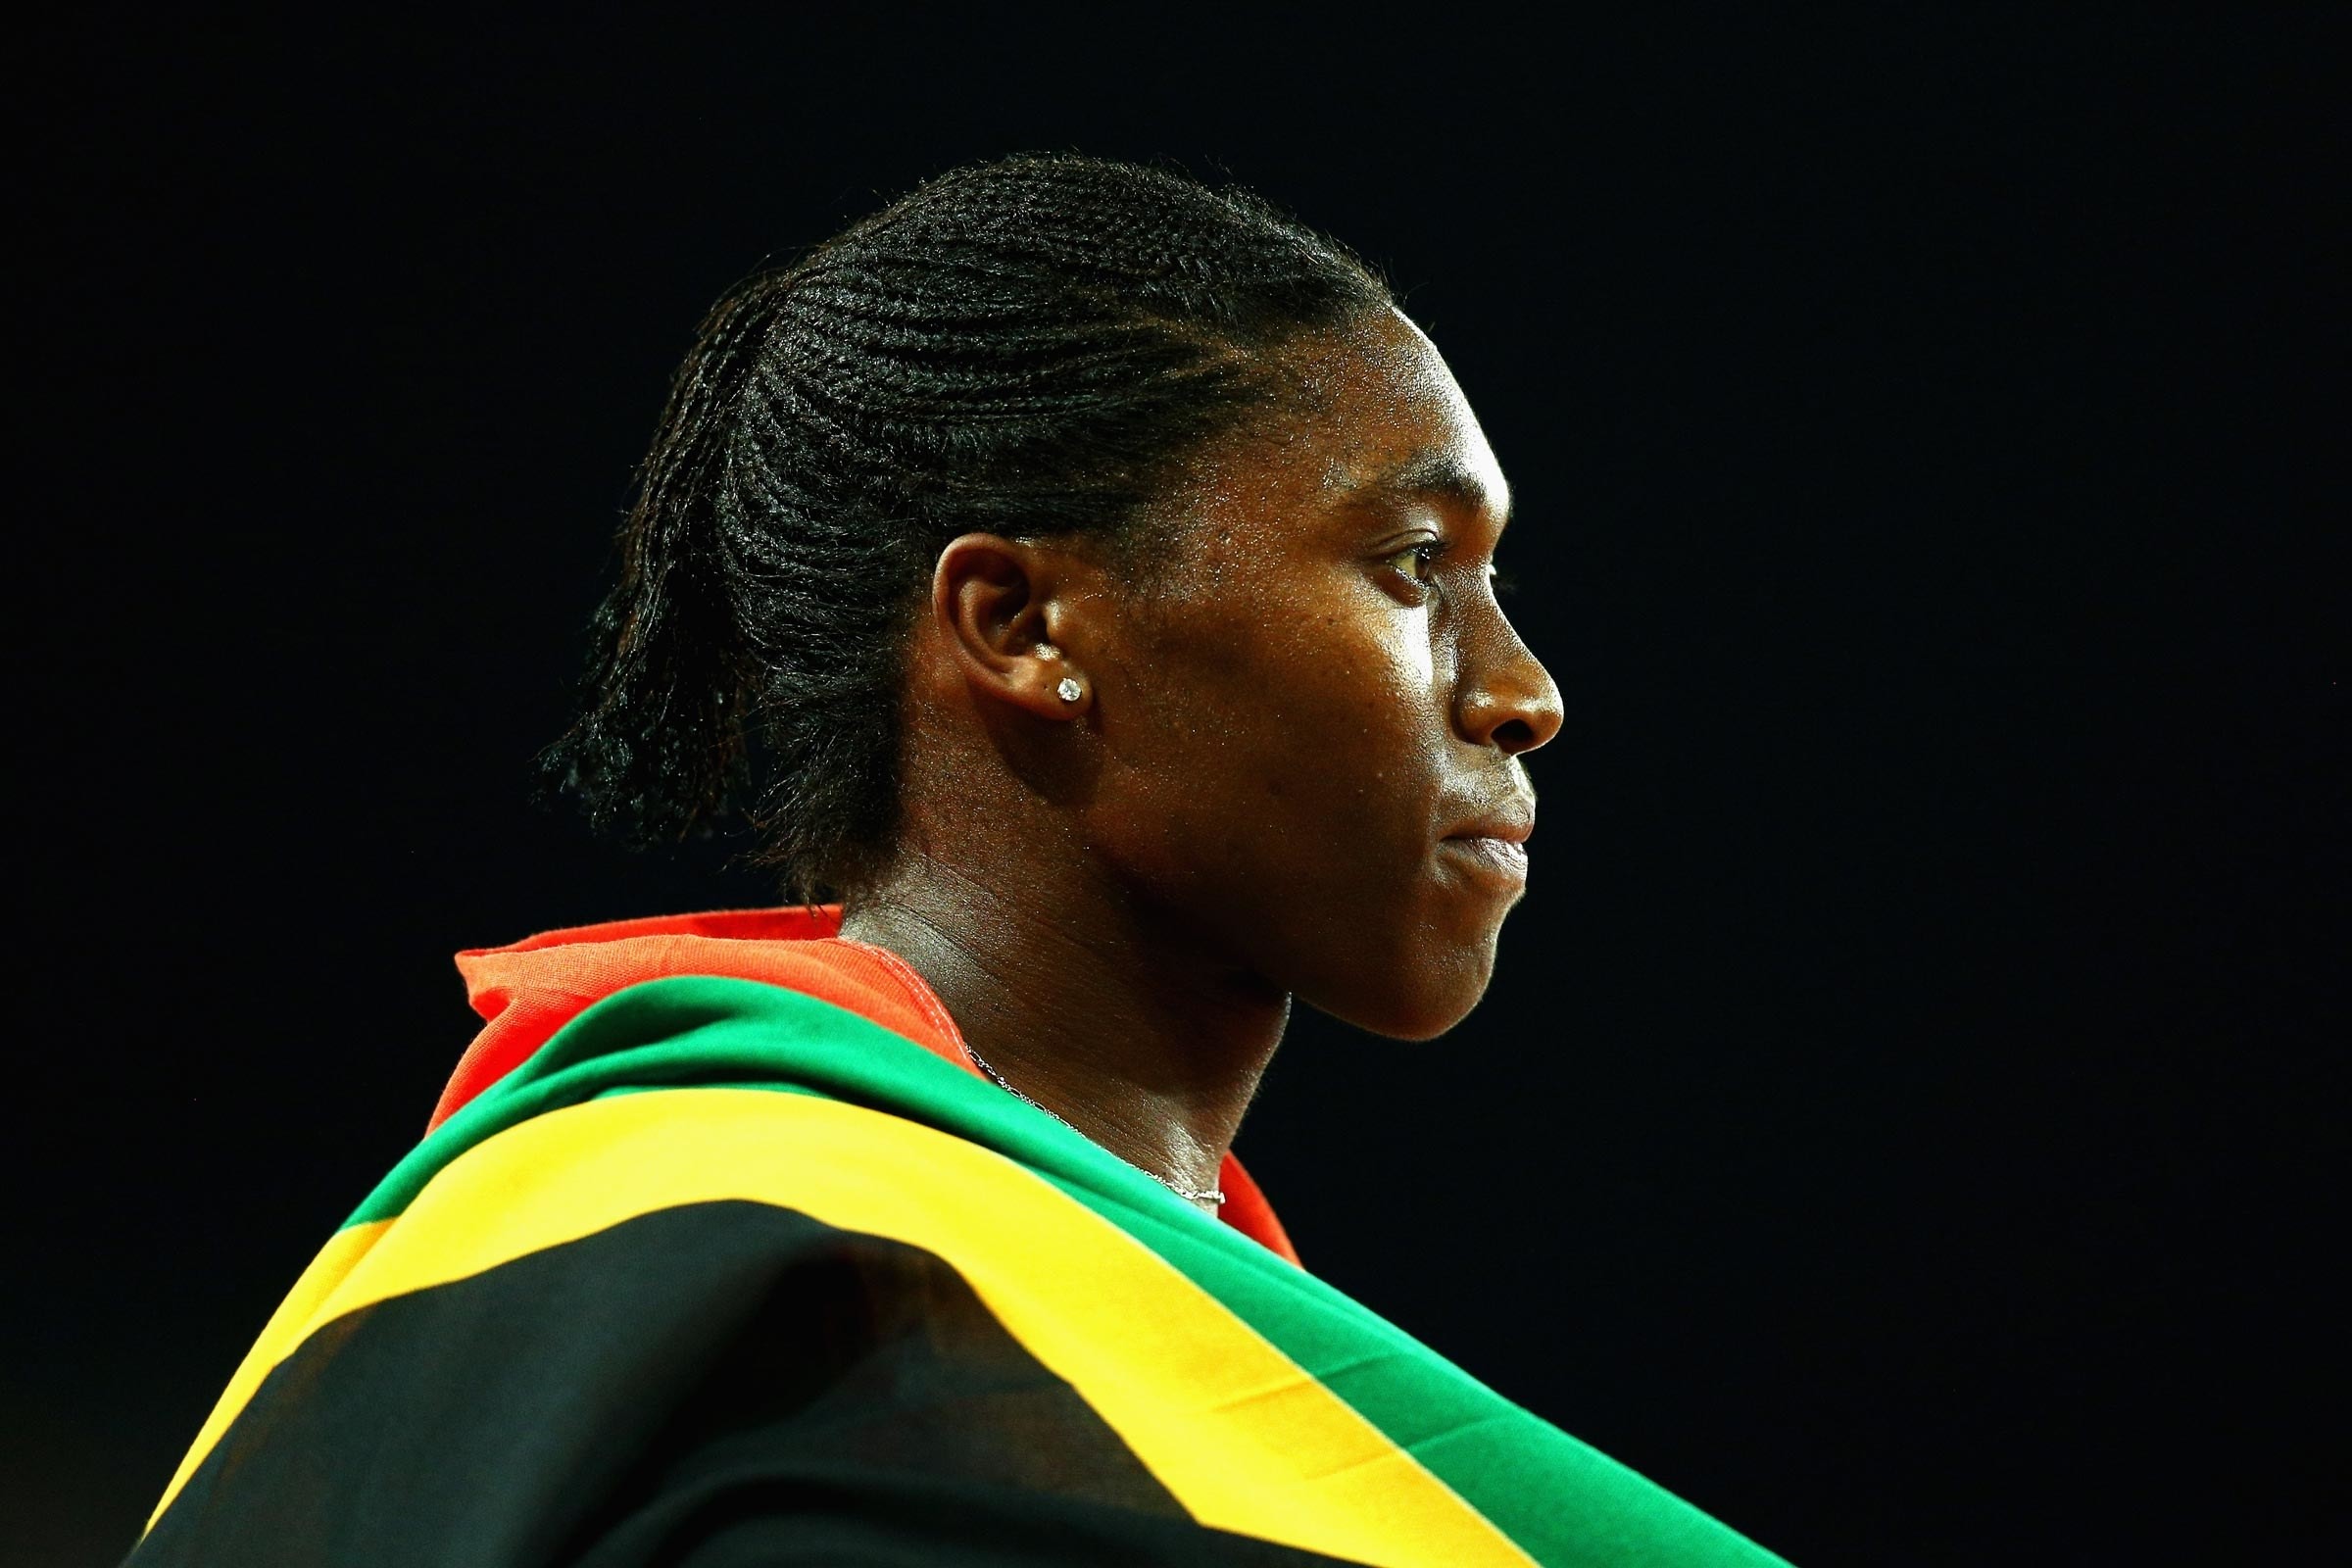 A Swiss court overturned its own ruling, disqualifying Caster Semenya from the upcoming World Championship 800m in Doha